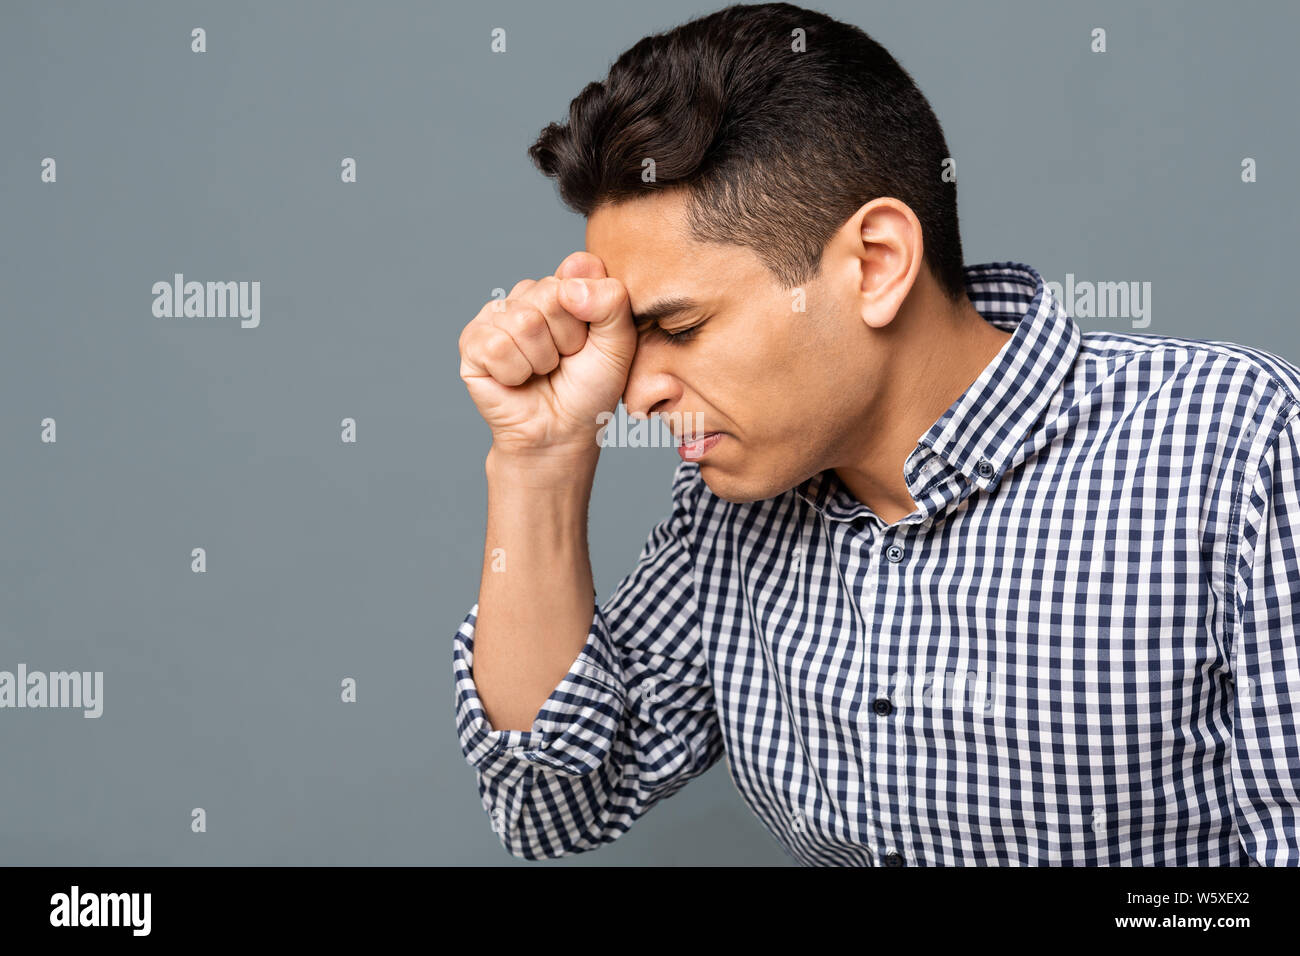 Upset Arab Man Pressing Clenched Fist To Forehead, Copy Space Stock Photo